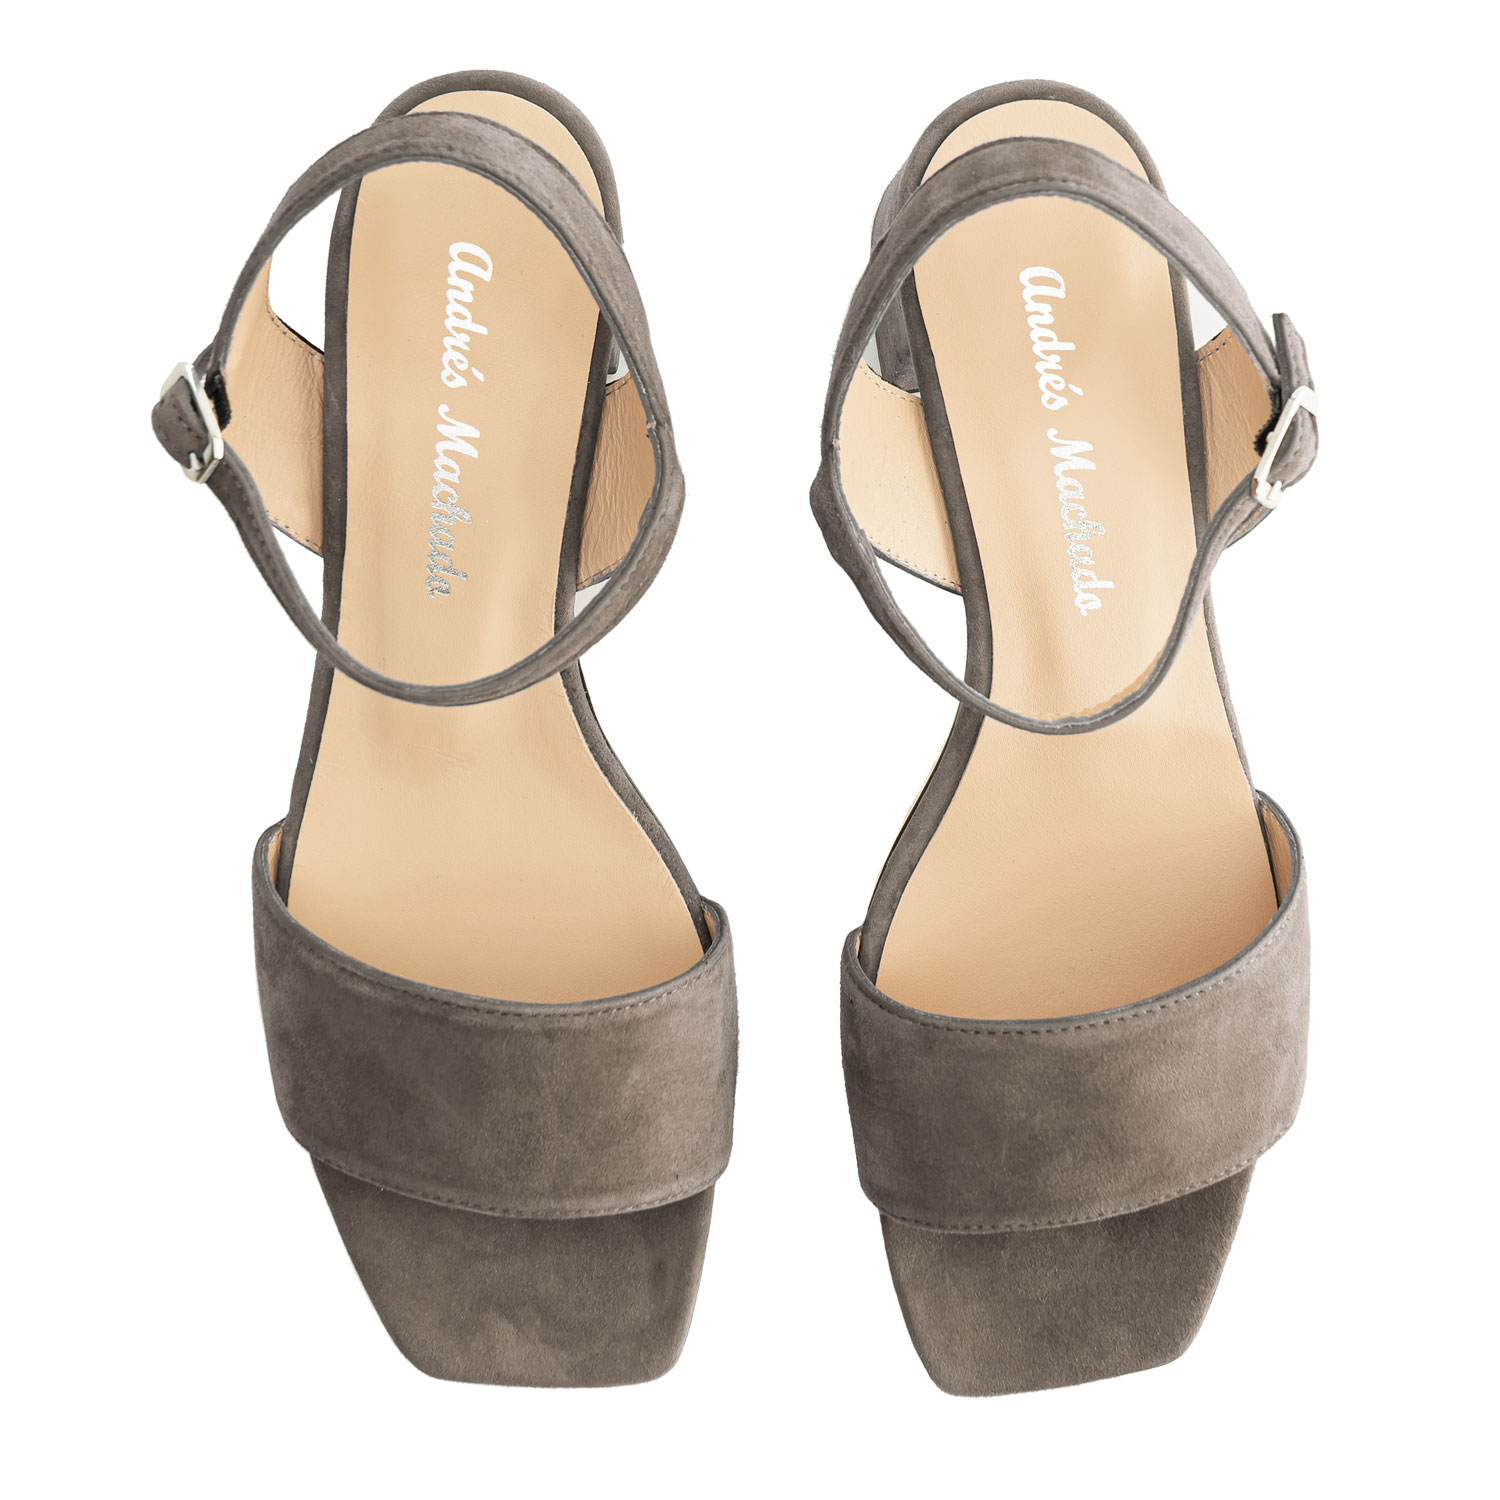 Block-heeled Sandals in Grey Suede Leather 